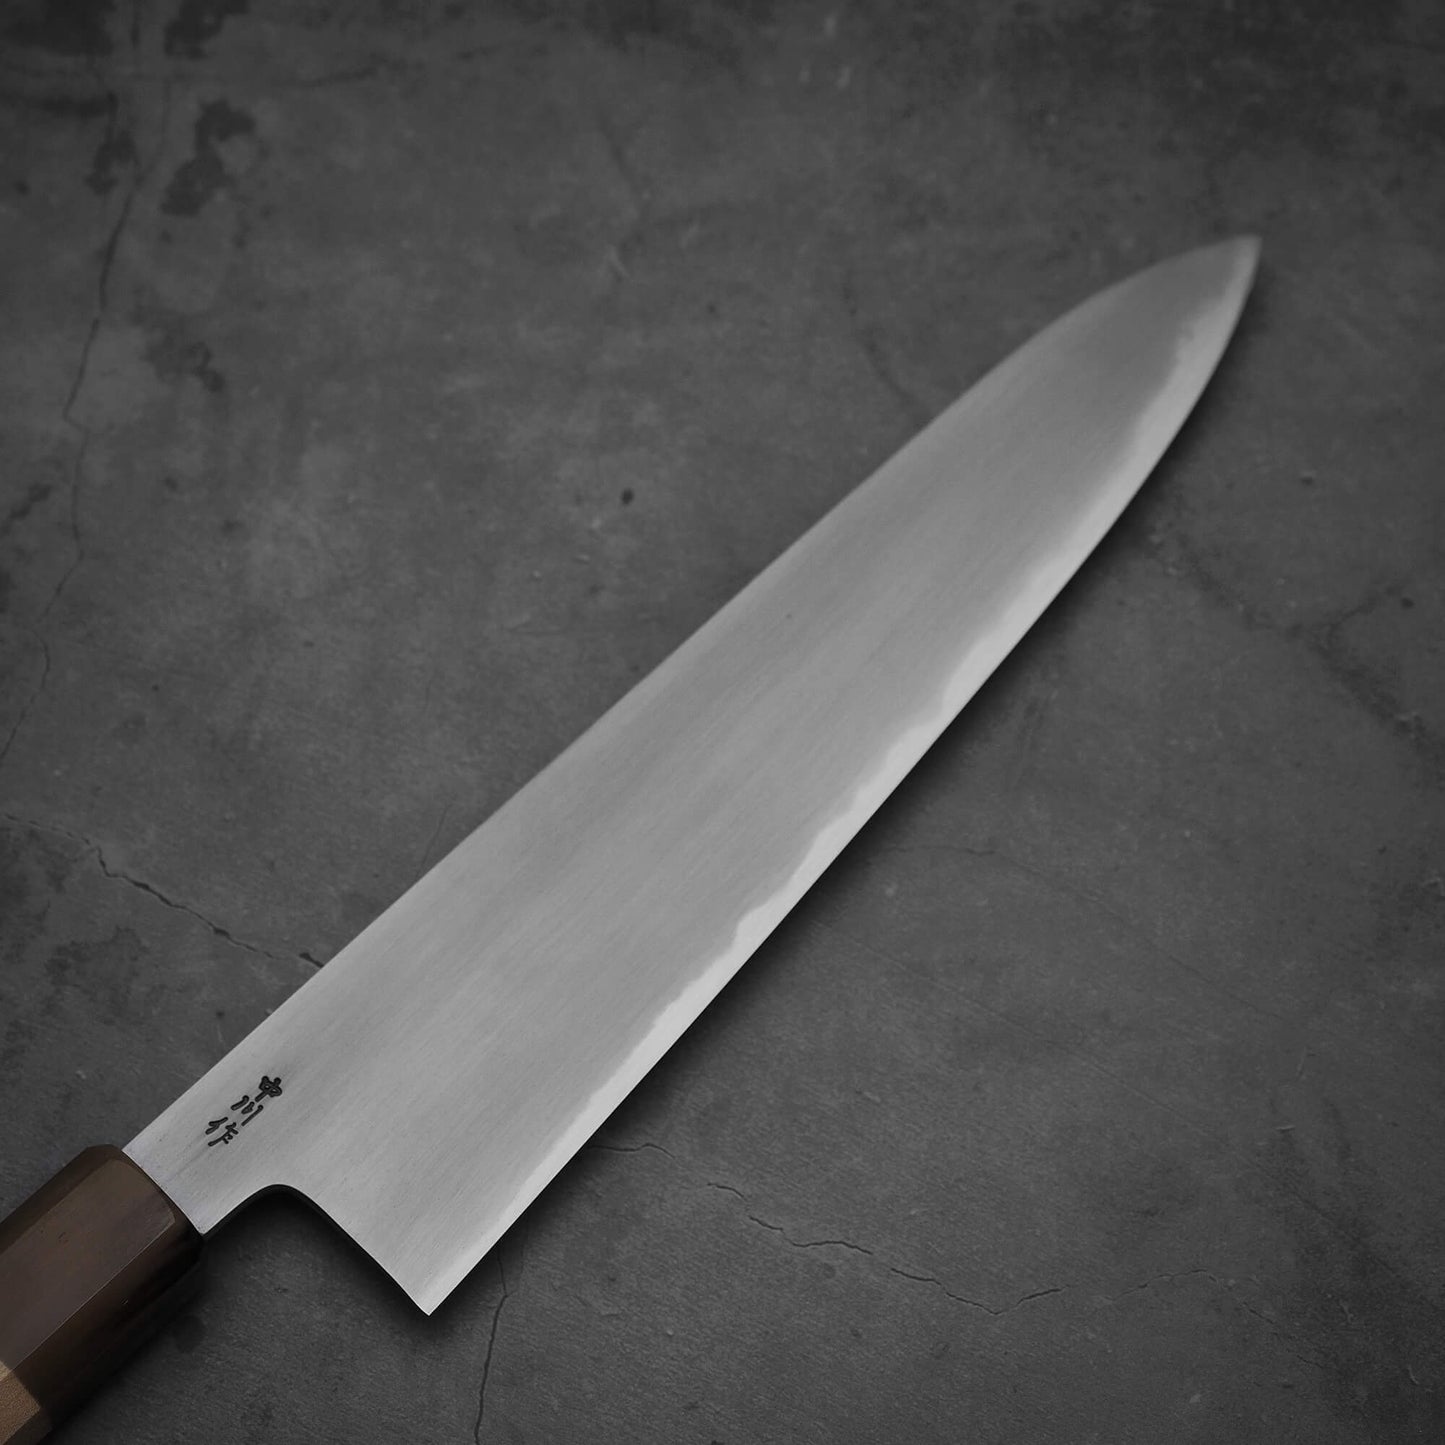 Top view of the blade of the Nakagawa aogami#2 gyuto. Image shows the right side of the blade.